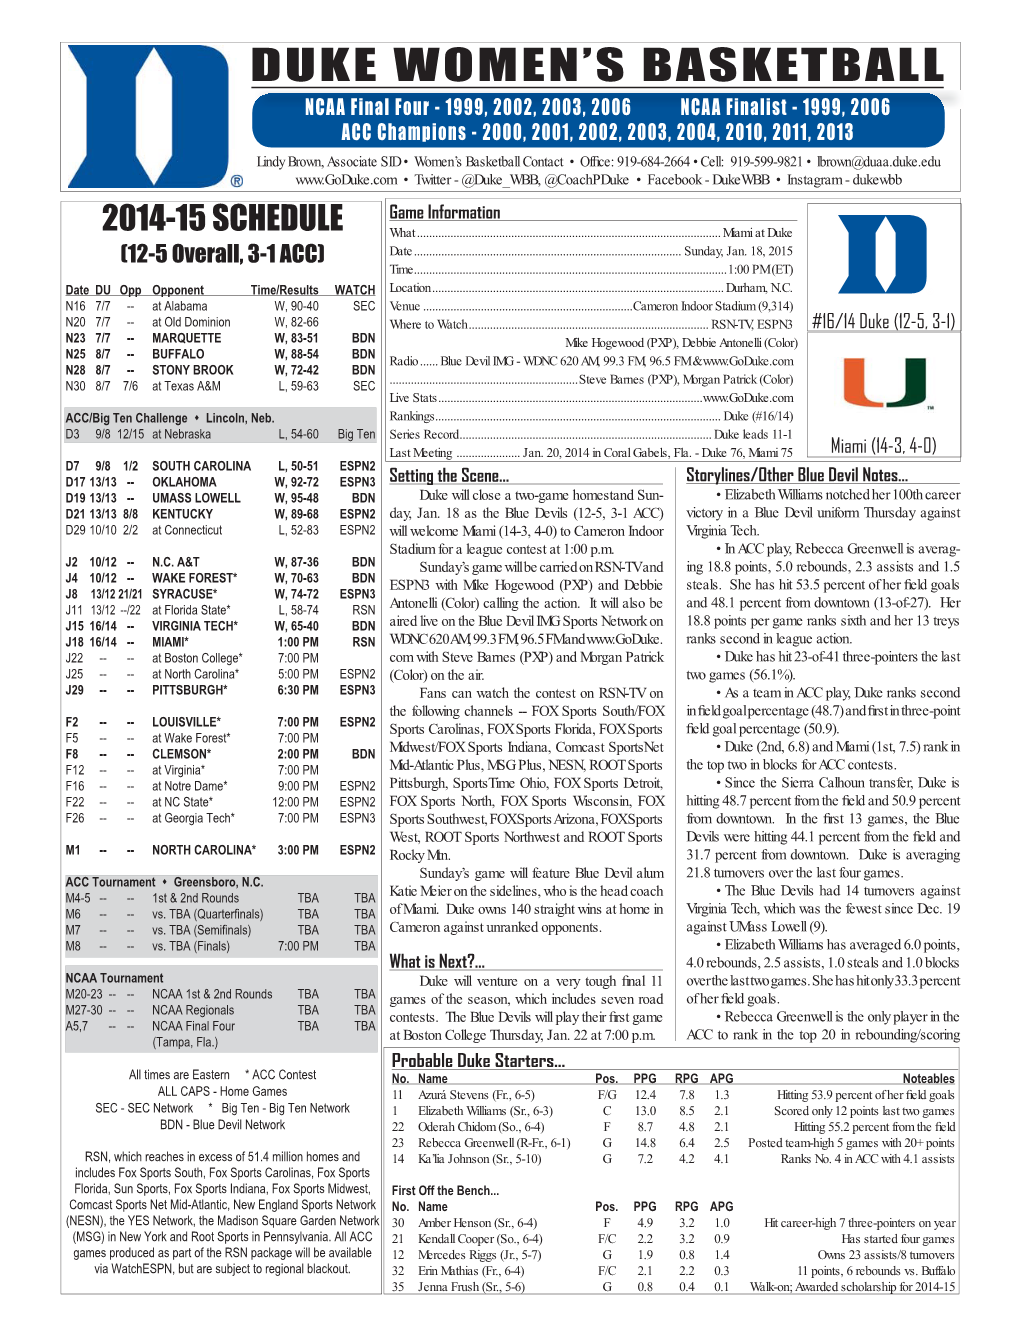 2014-15 WBB Game Notes